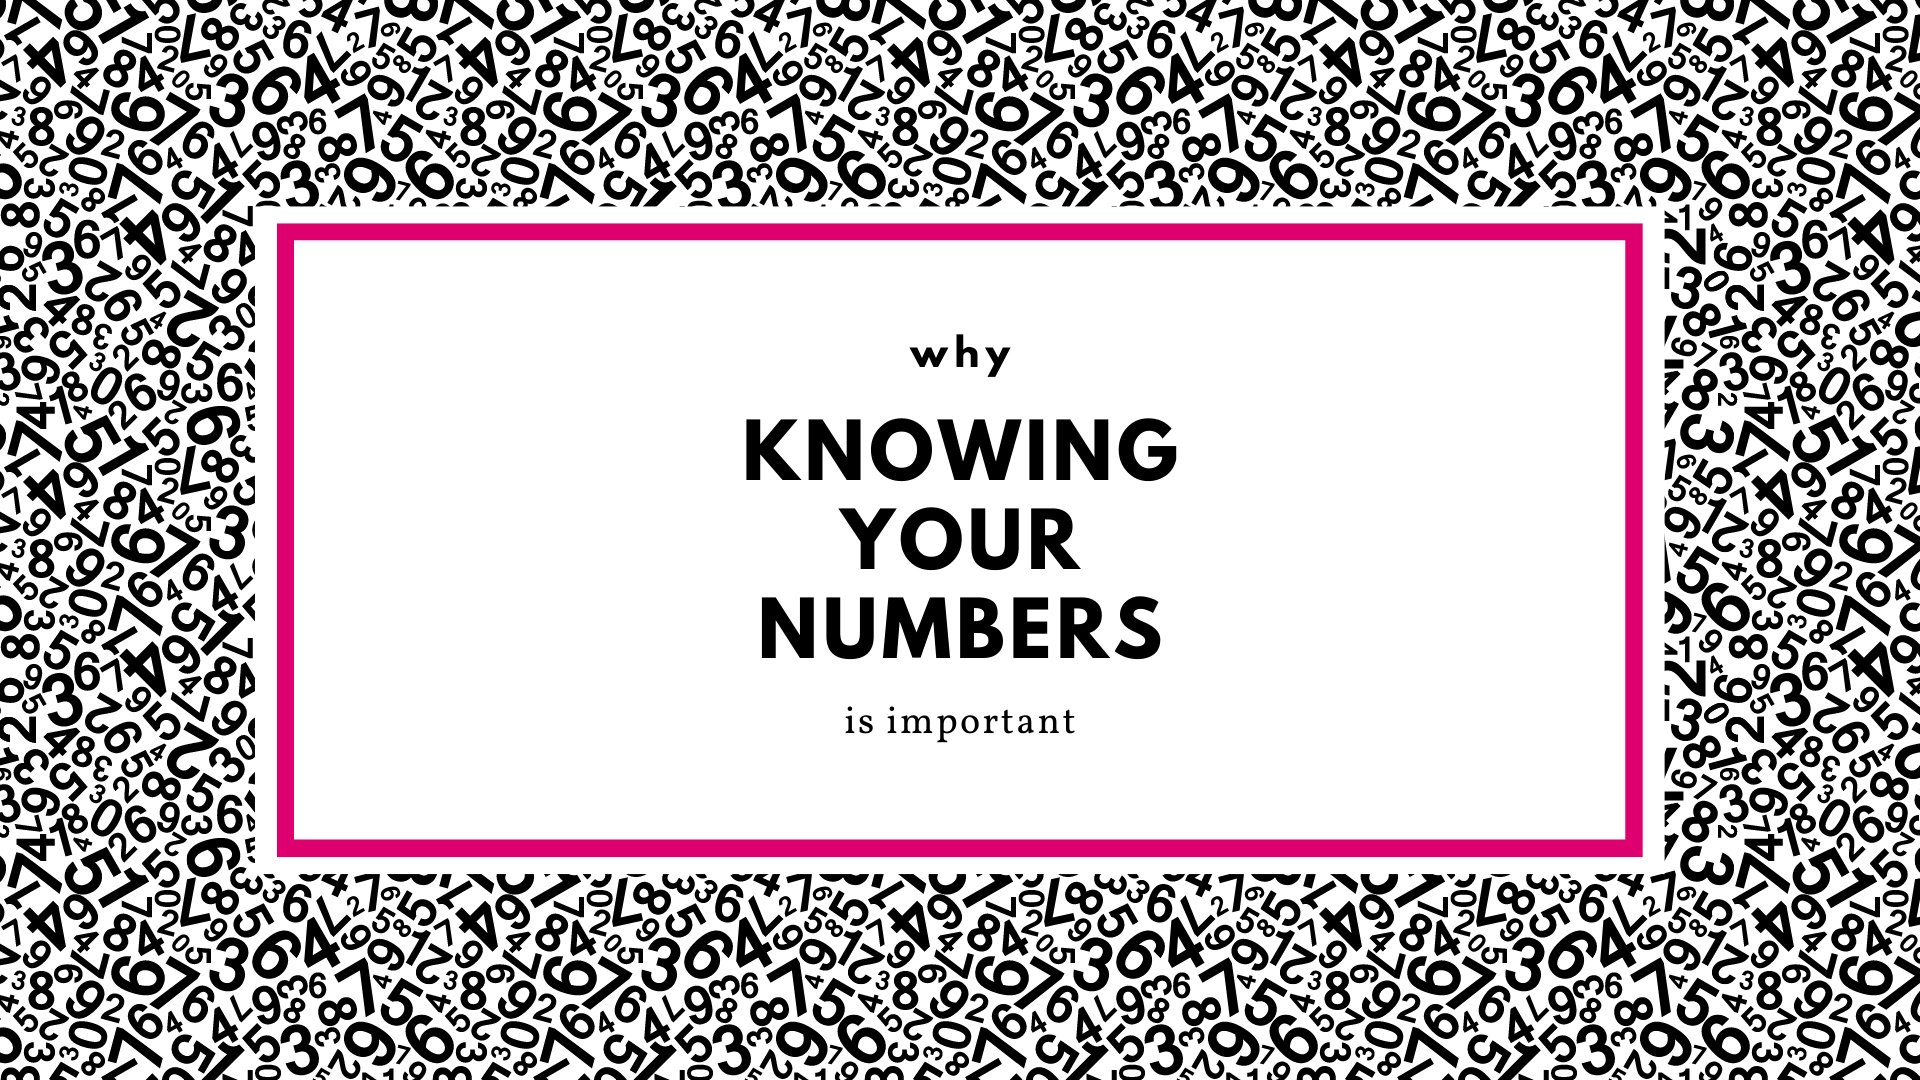 Why knowing your numbers is important